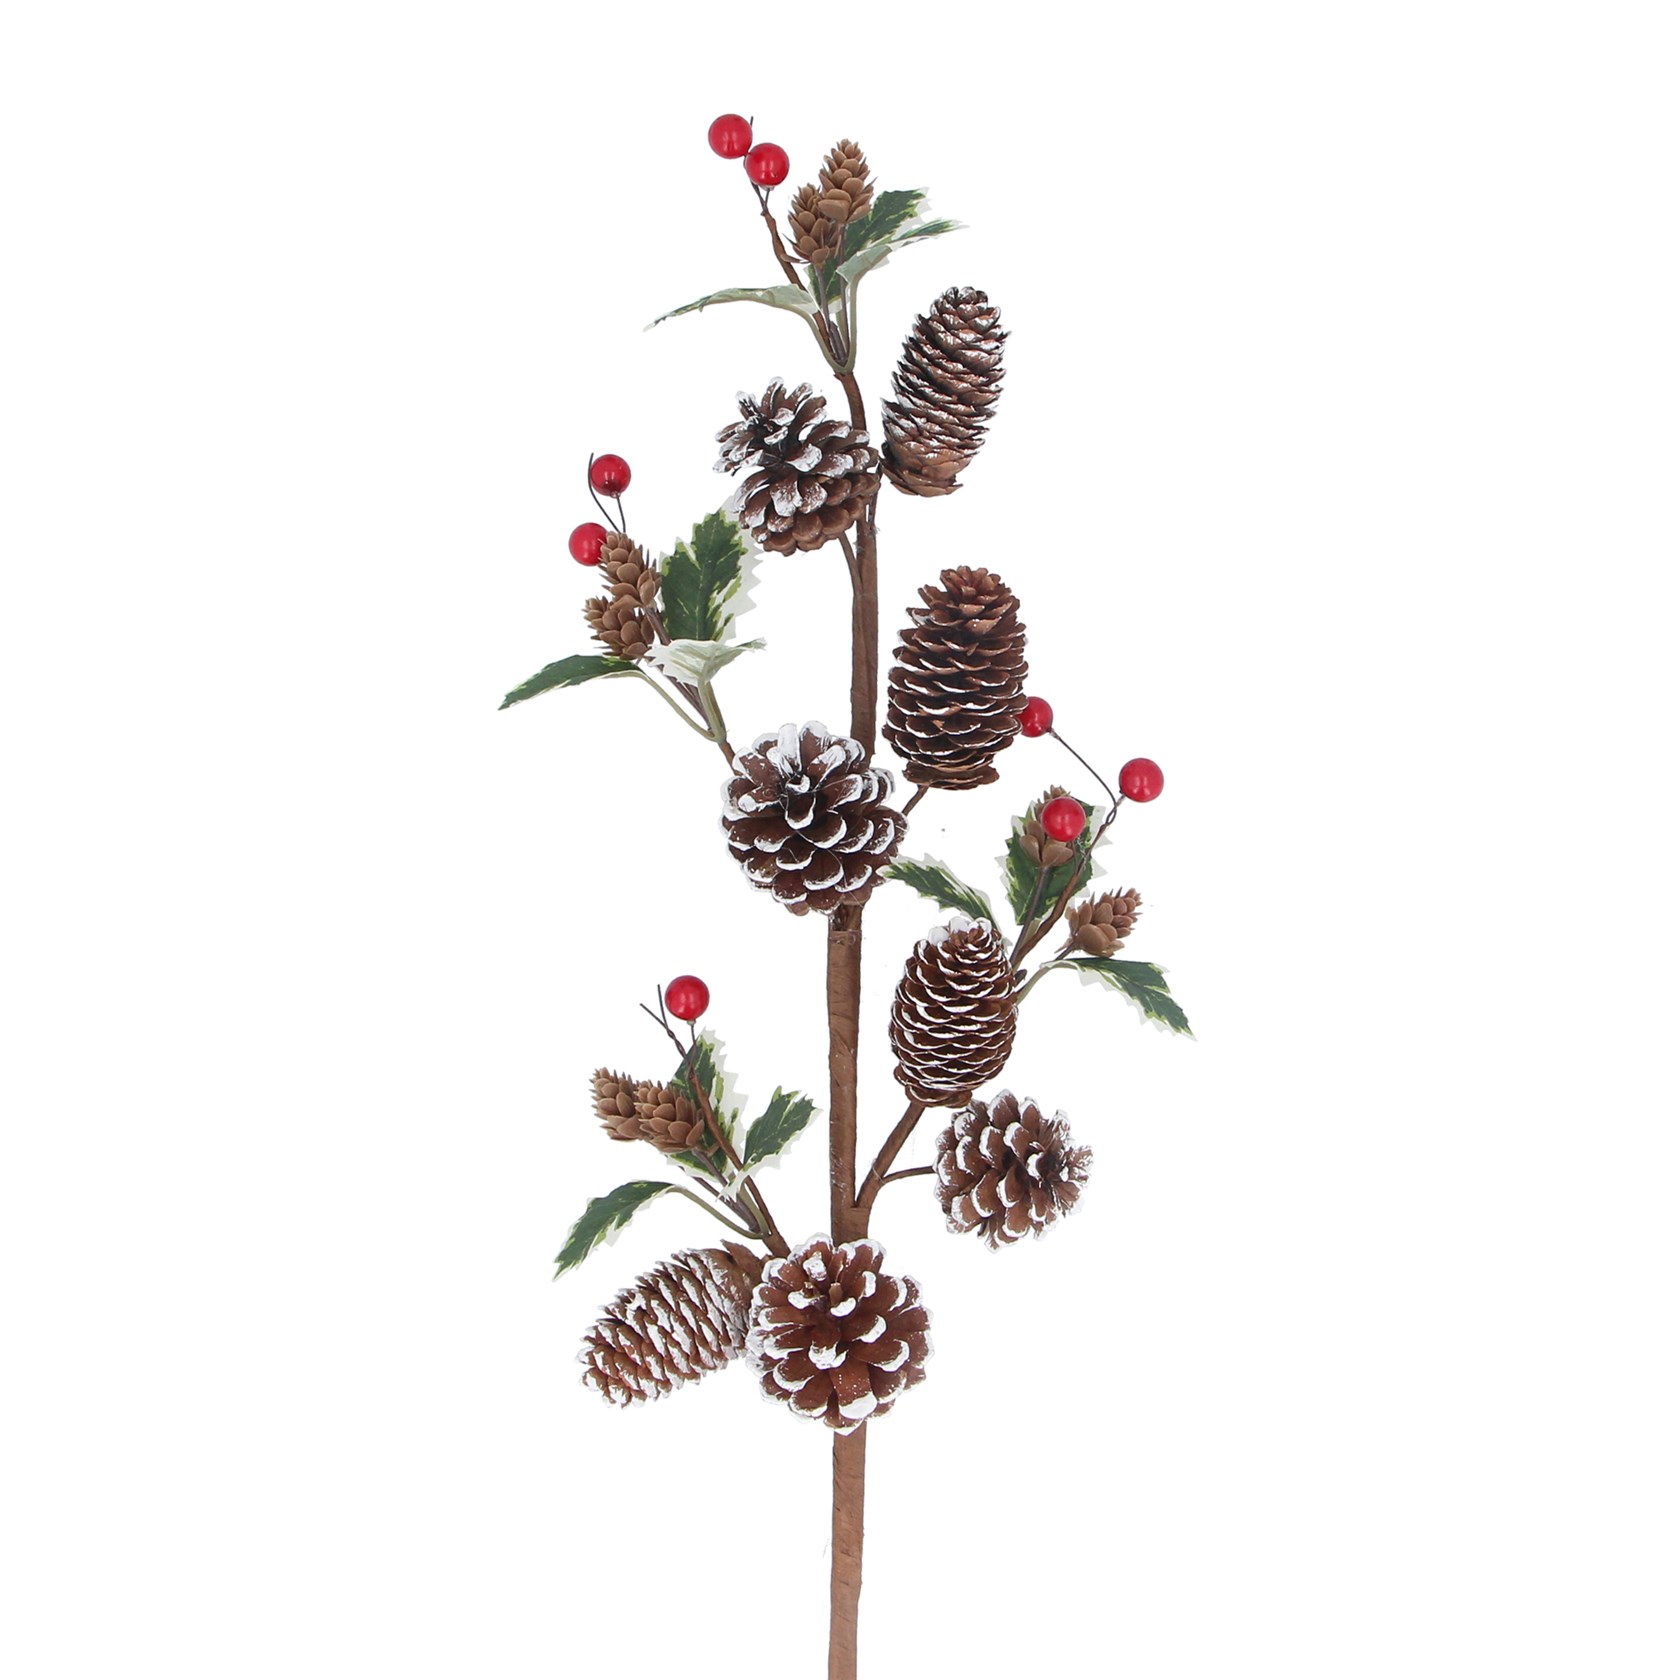 Red berries leaves and snowy cones Christmas spray. By Gisela Graham. The perfect festive addition to your home.